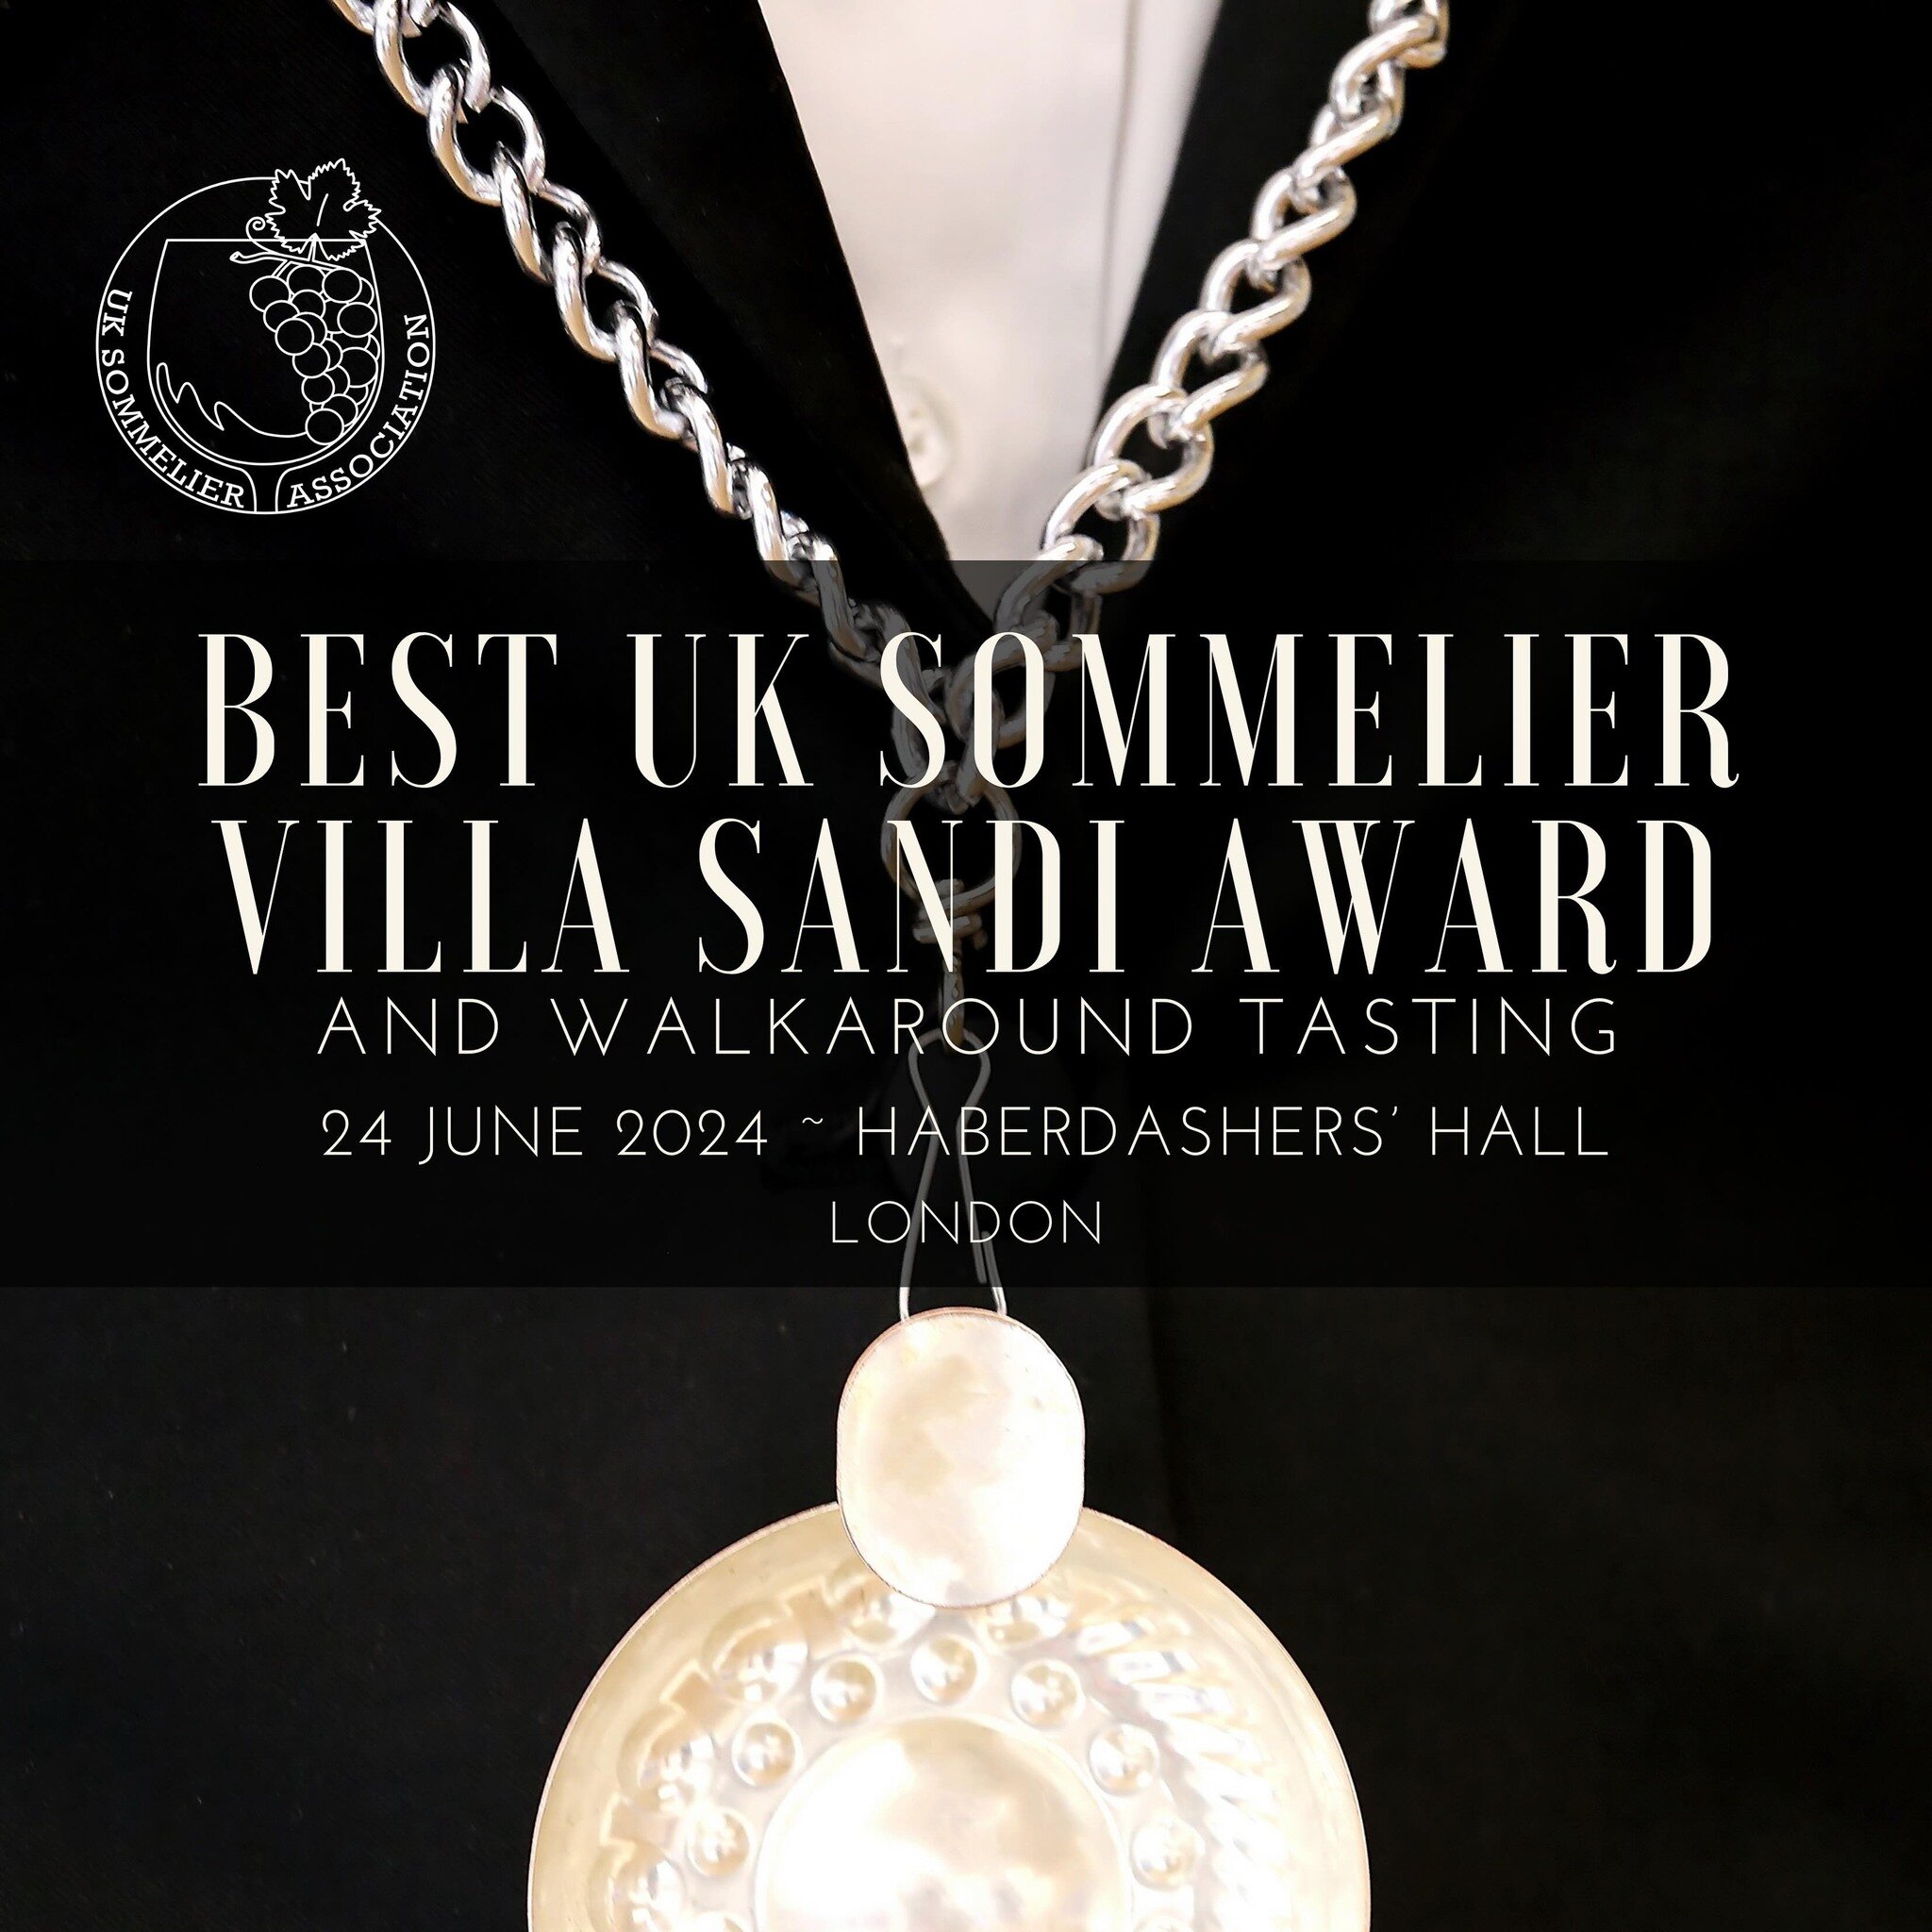 SAVE THE DATE! On Monday, June 24th, we will once again welcome all our members and friends to the eighth edition of the Best UK Sommelier - Villa Sandi Award. We can&rsquo;t wait to share our special day with all of you! 🥂🍾 

Registration link on 